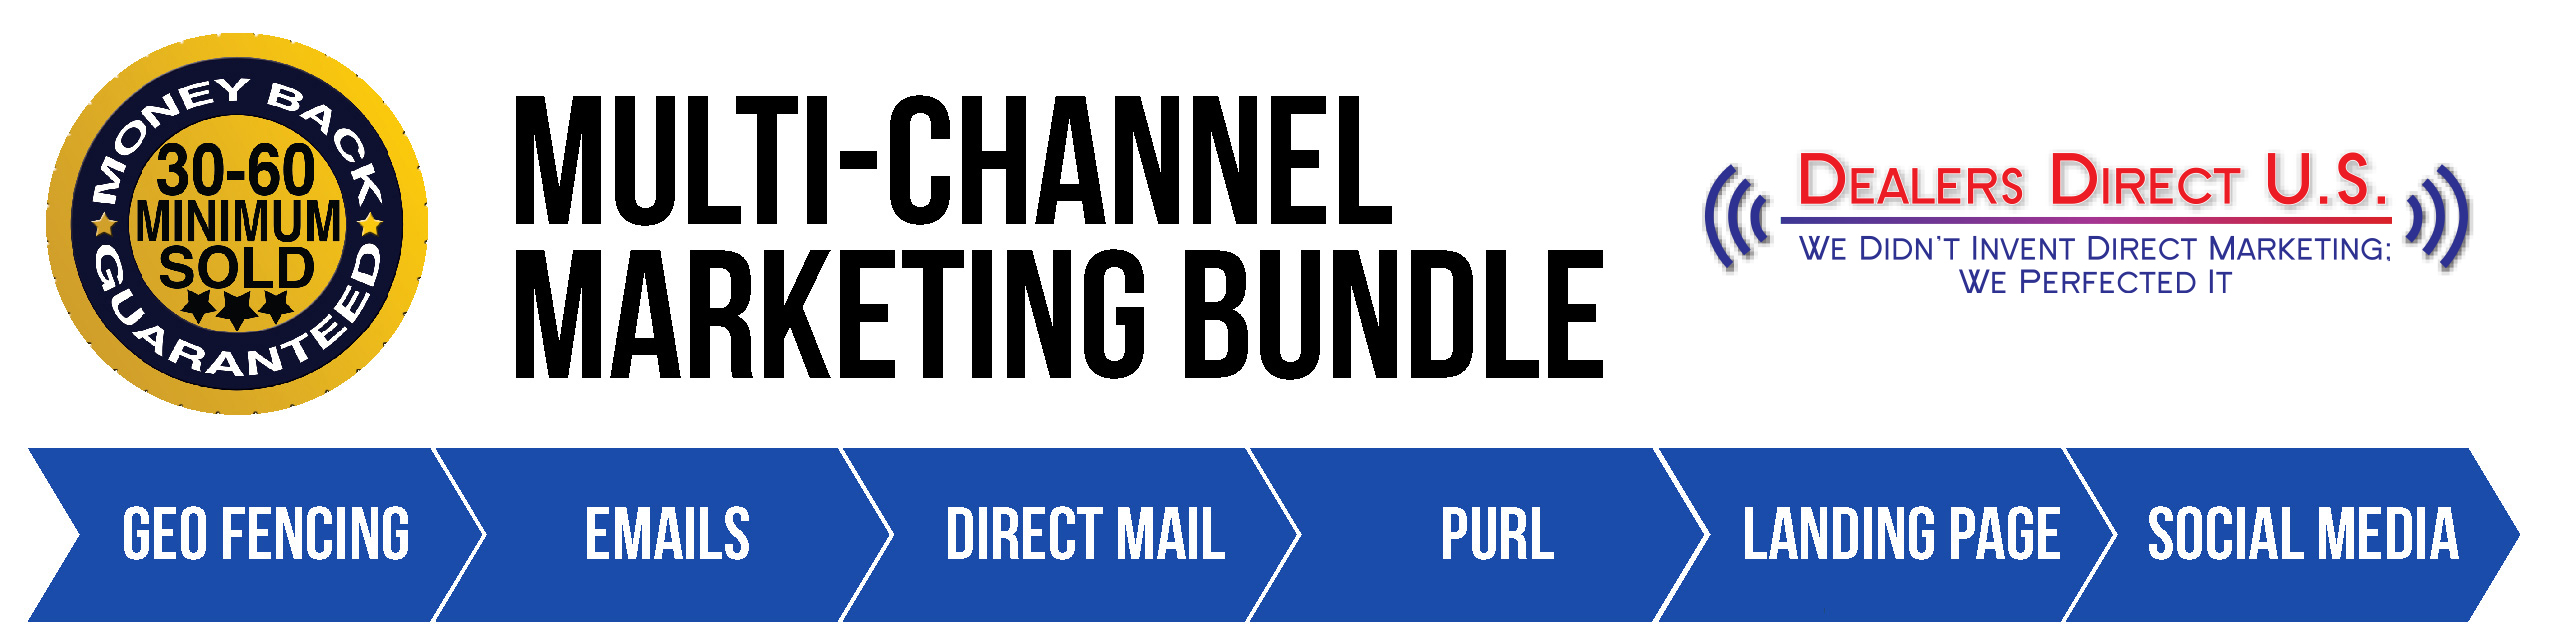 Multi-Channel Marketing Bundle. 30-60 minimum sold guaranteeed. Geo fencing emails direct mail PURL landing page social media